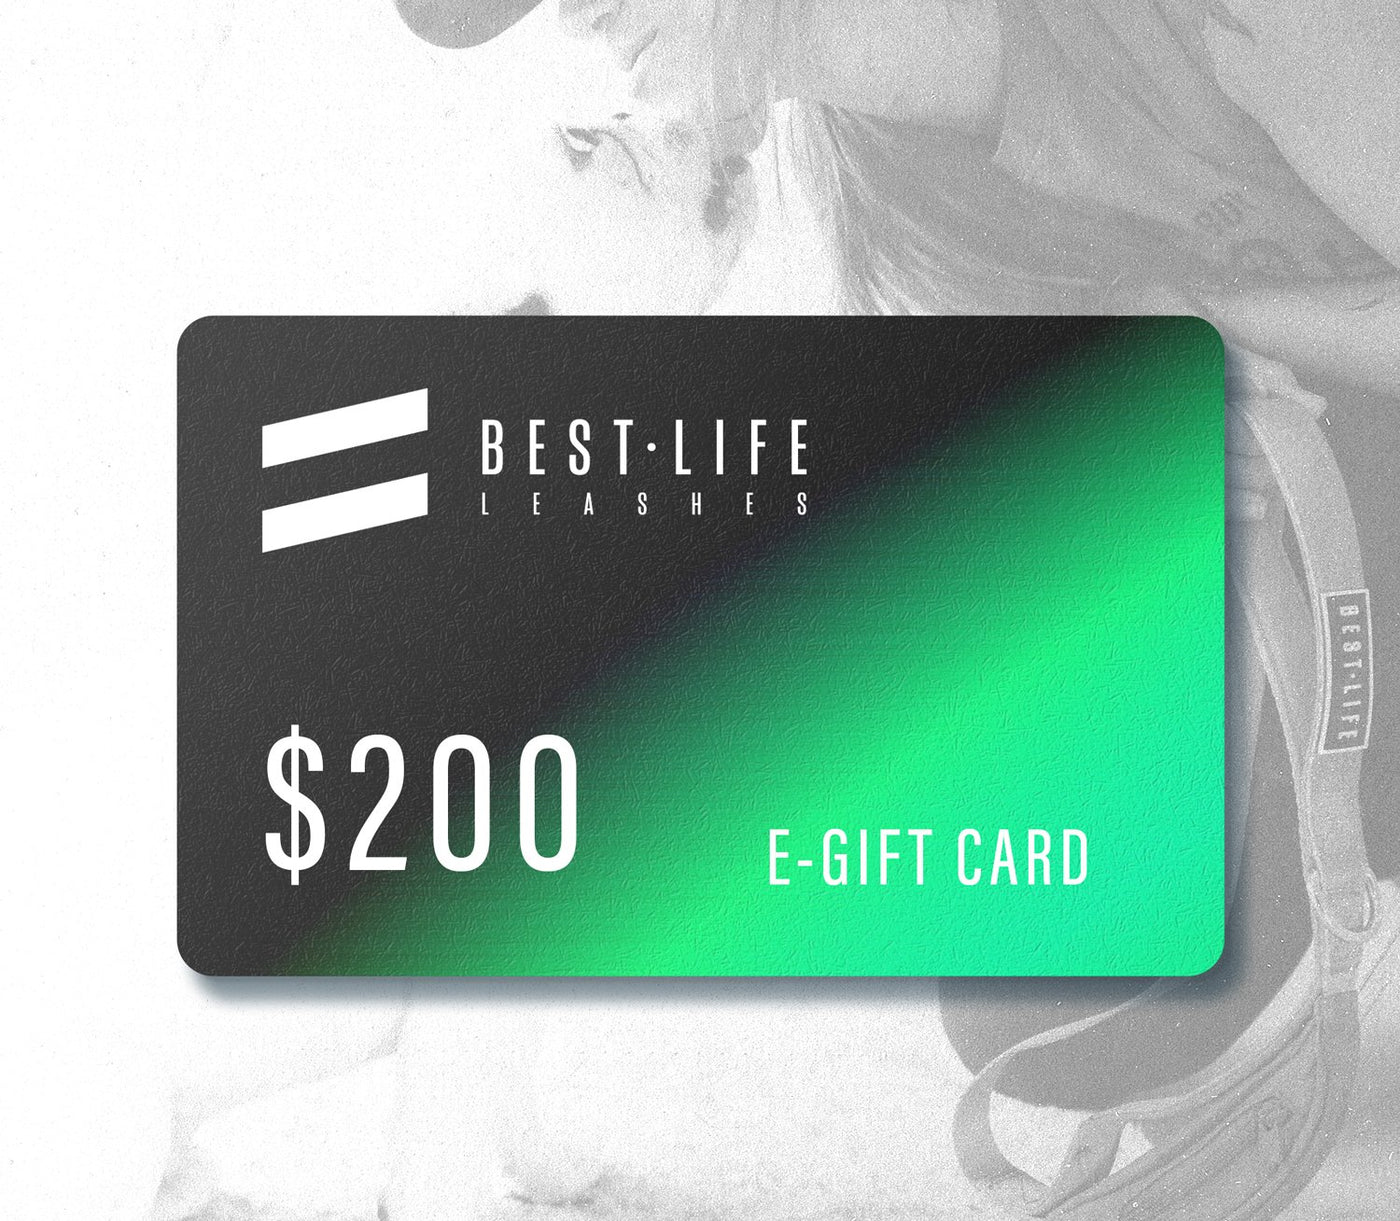 Best Life Leashes E-Gift Card - $200.00 Gift Cards Best Life Leashes | Functional Dog Leashes With A Mission $200.00 